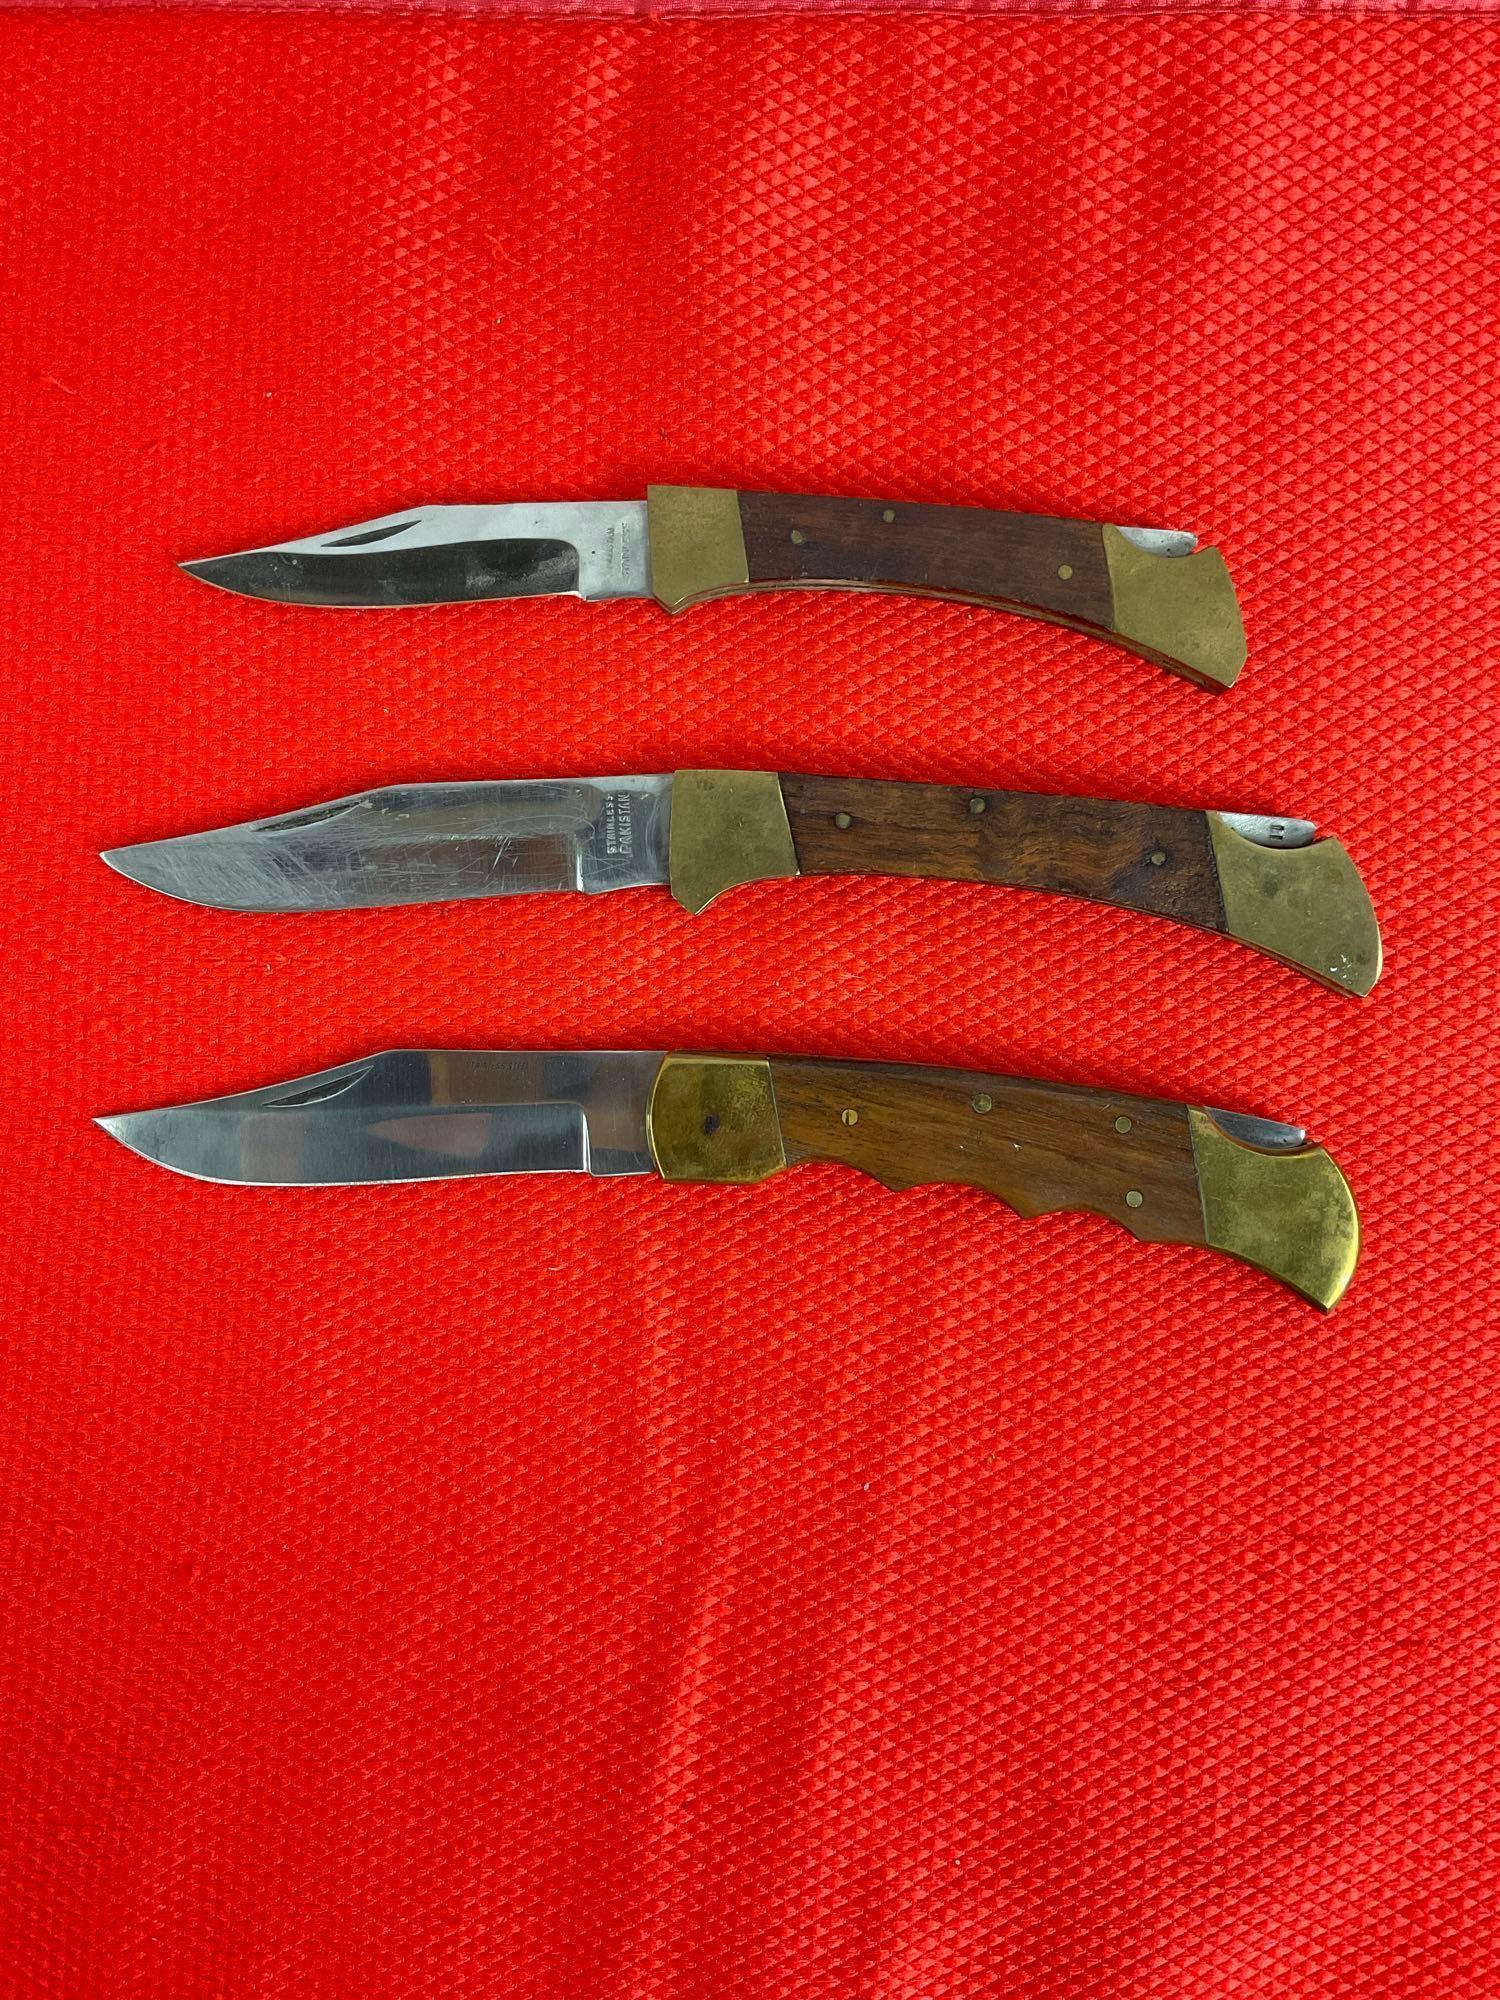 3 pcs Vintage Stainless Steel Folding Blade Pocket Knives w/ Wood Handles. Made in Pakistan. See